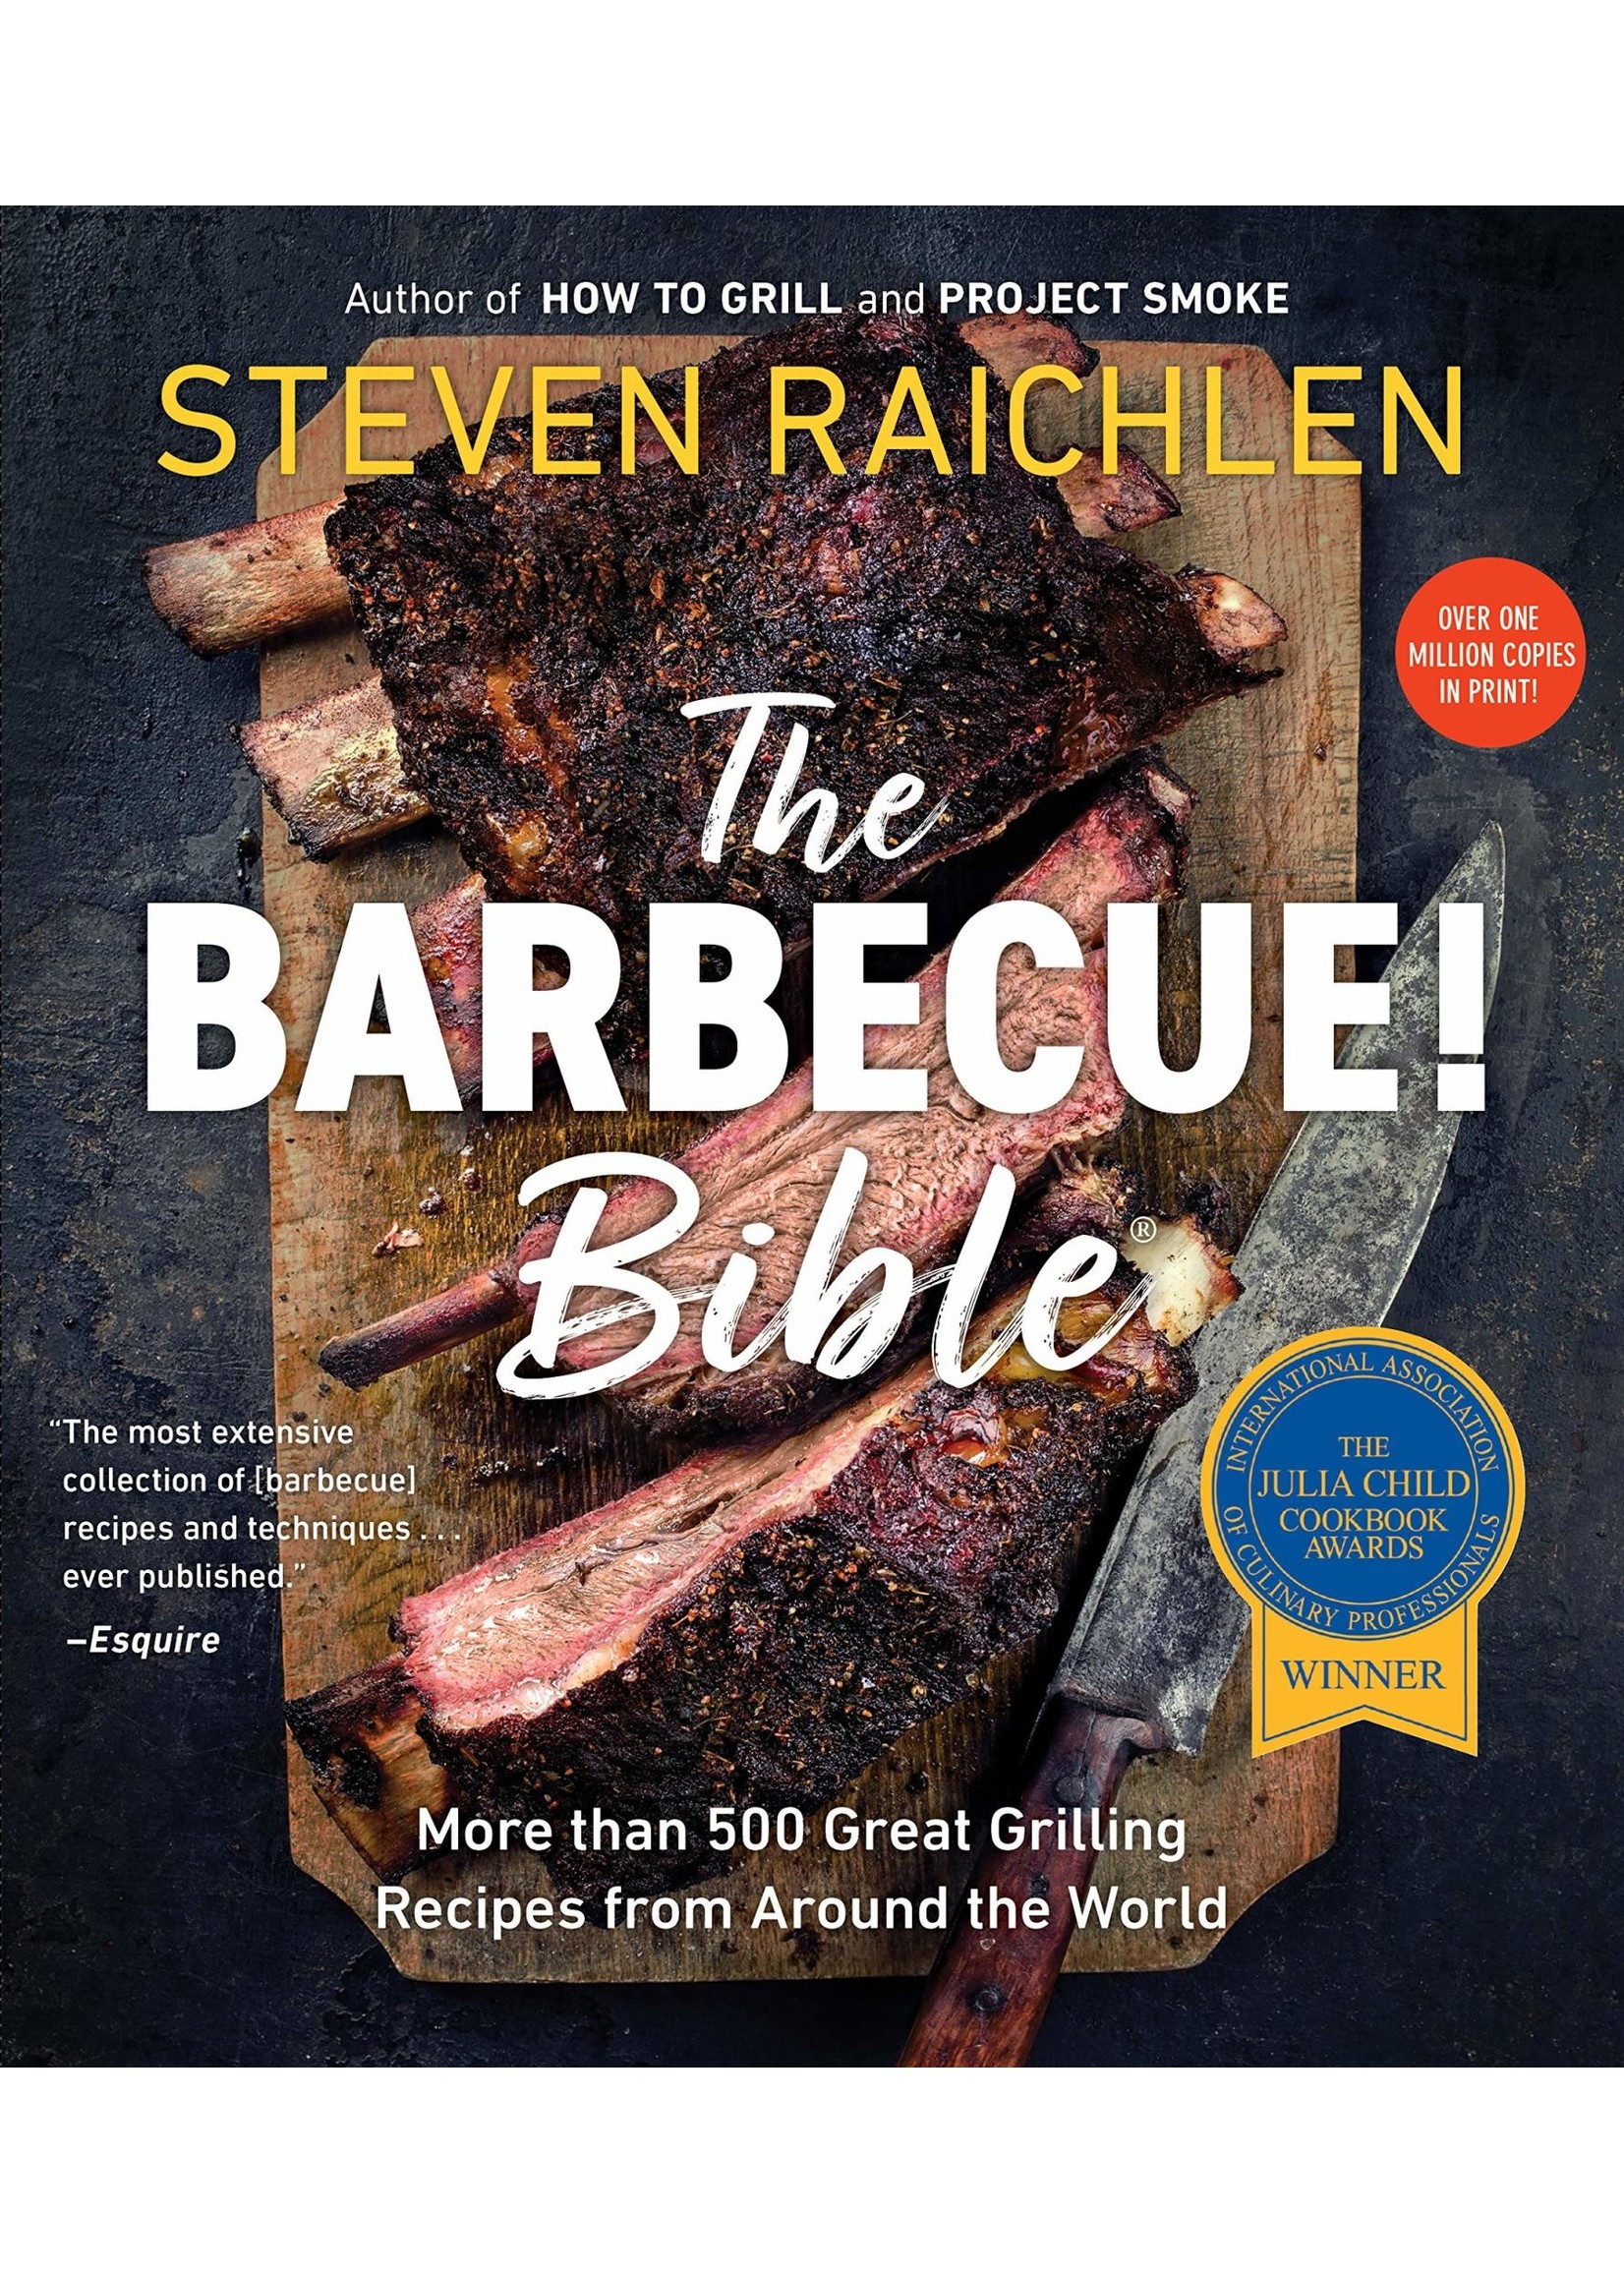 THE BARBECUE! BIBLE-  10TH ANNIVERSARY EDITION